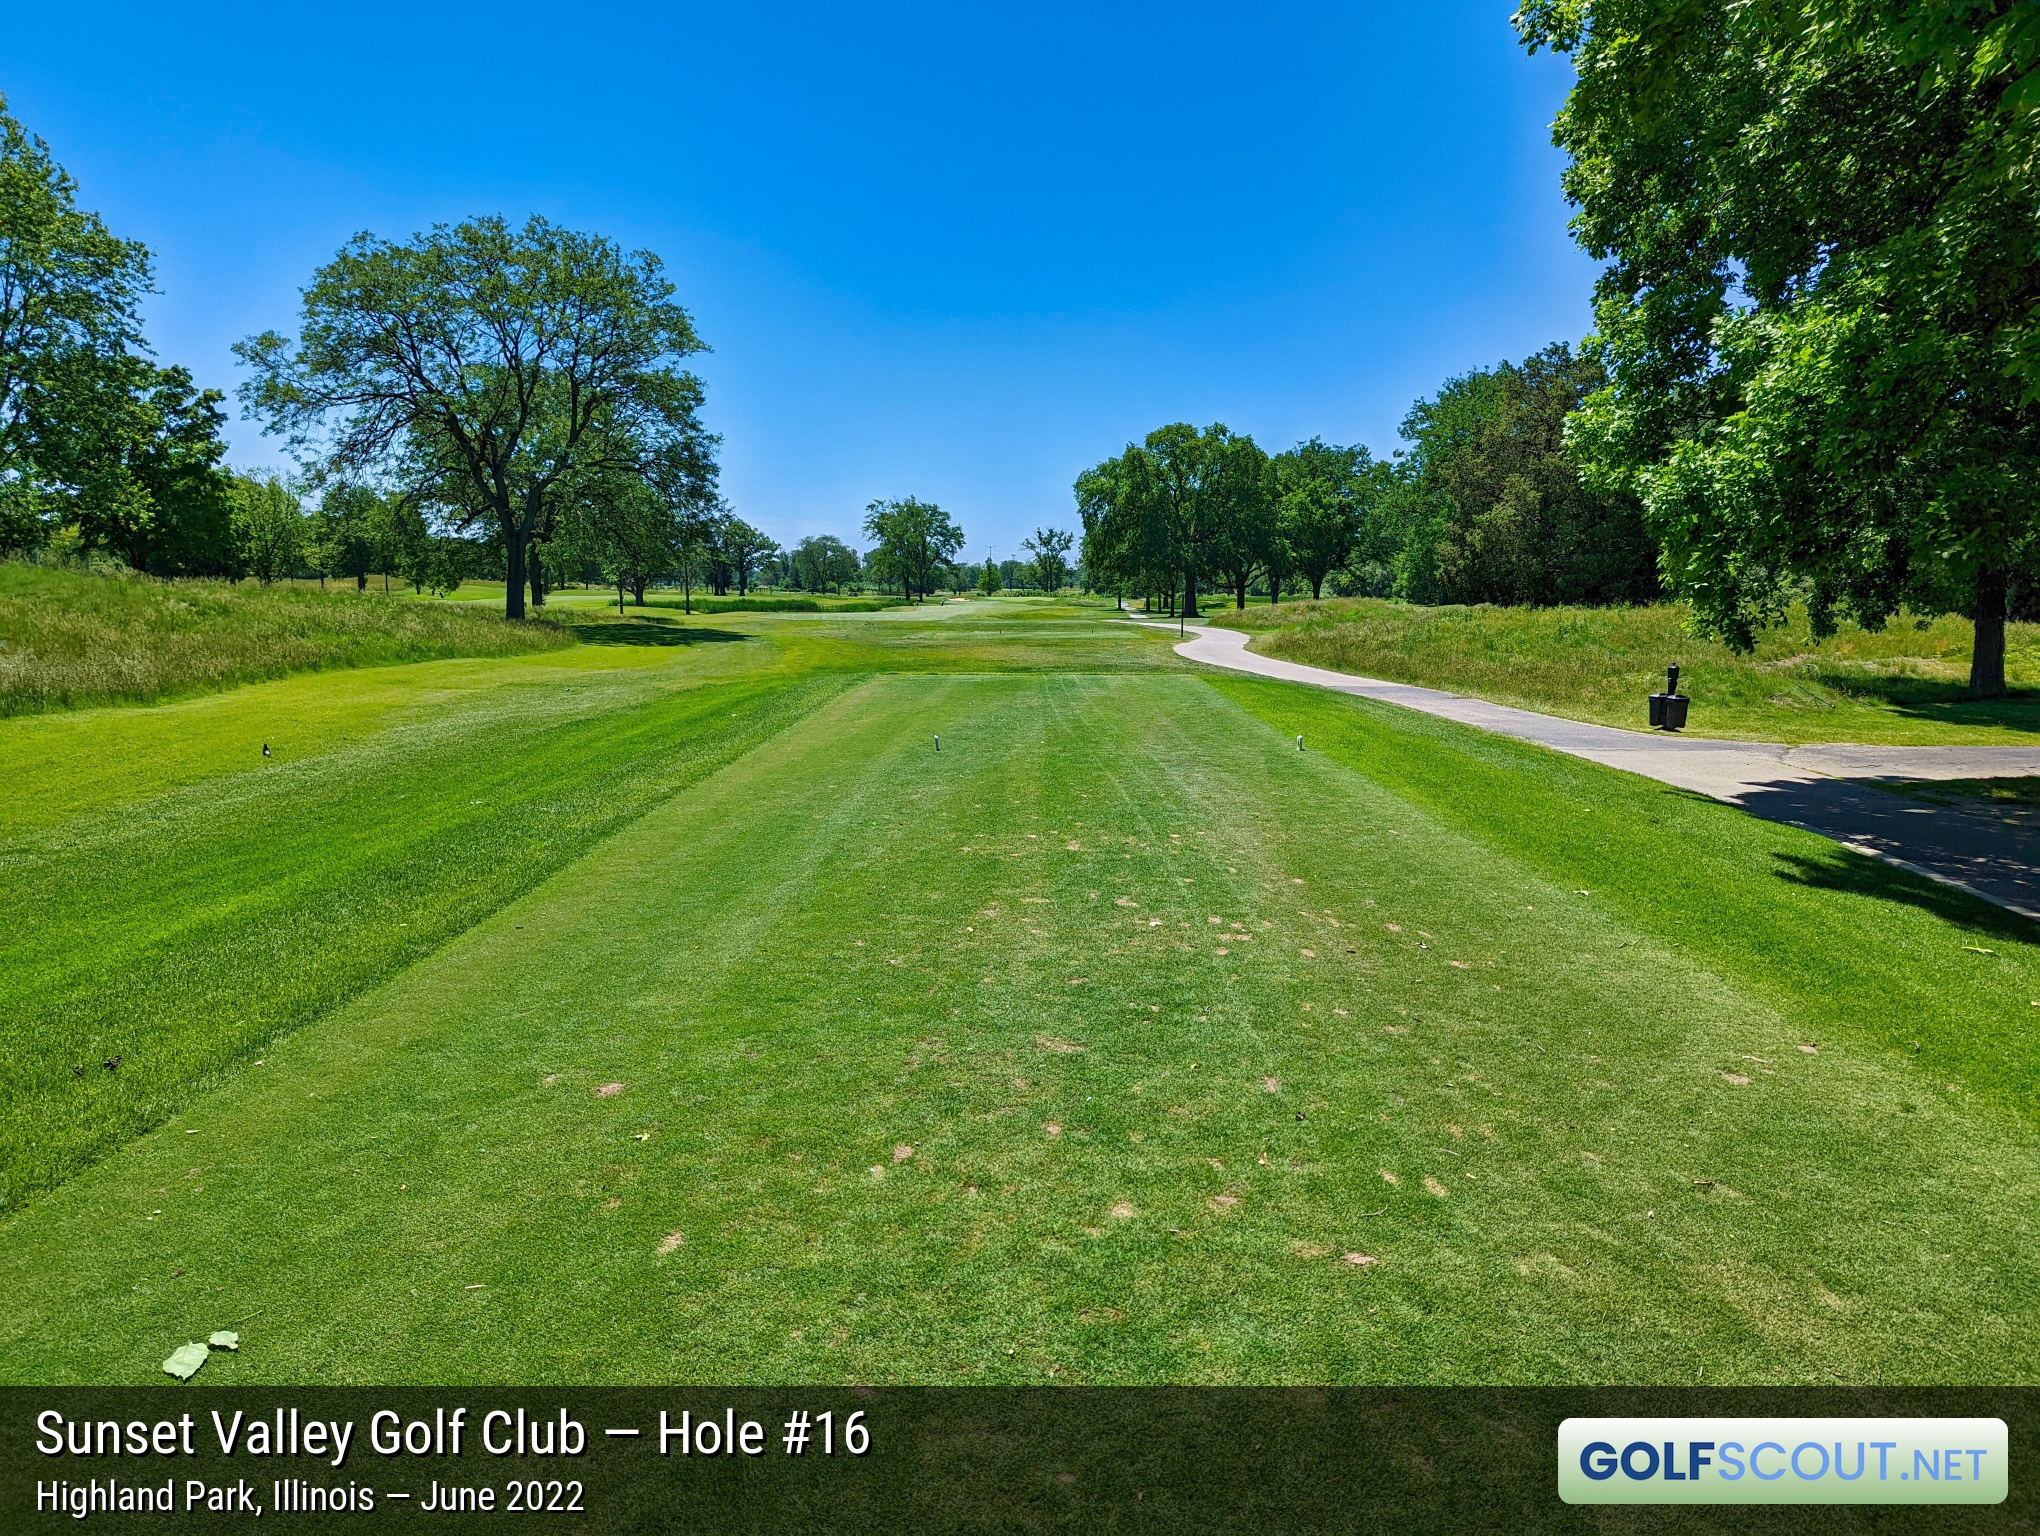 Photo of hole #16 at Sunset Valley Golf Club in Highland Park, Illinois. 